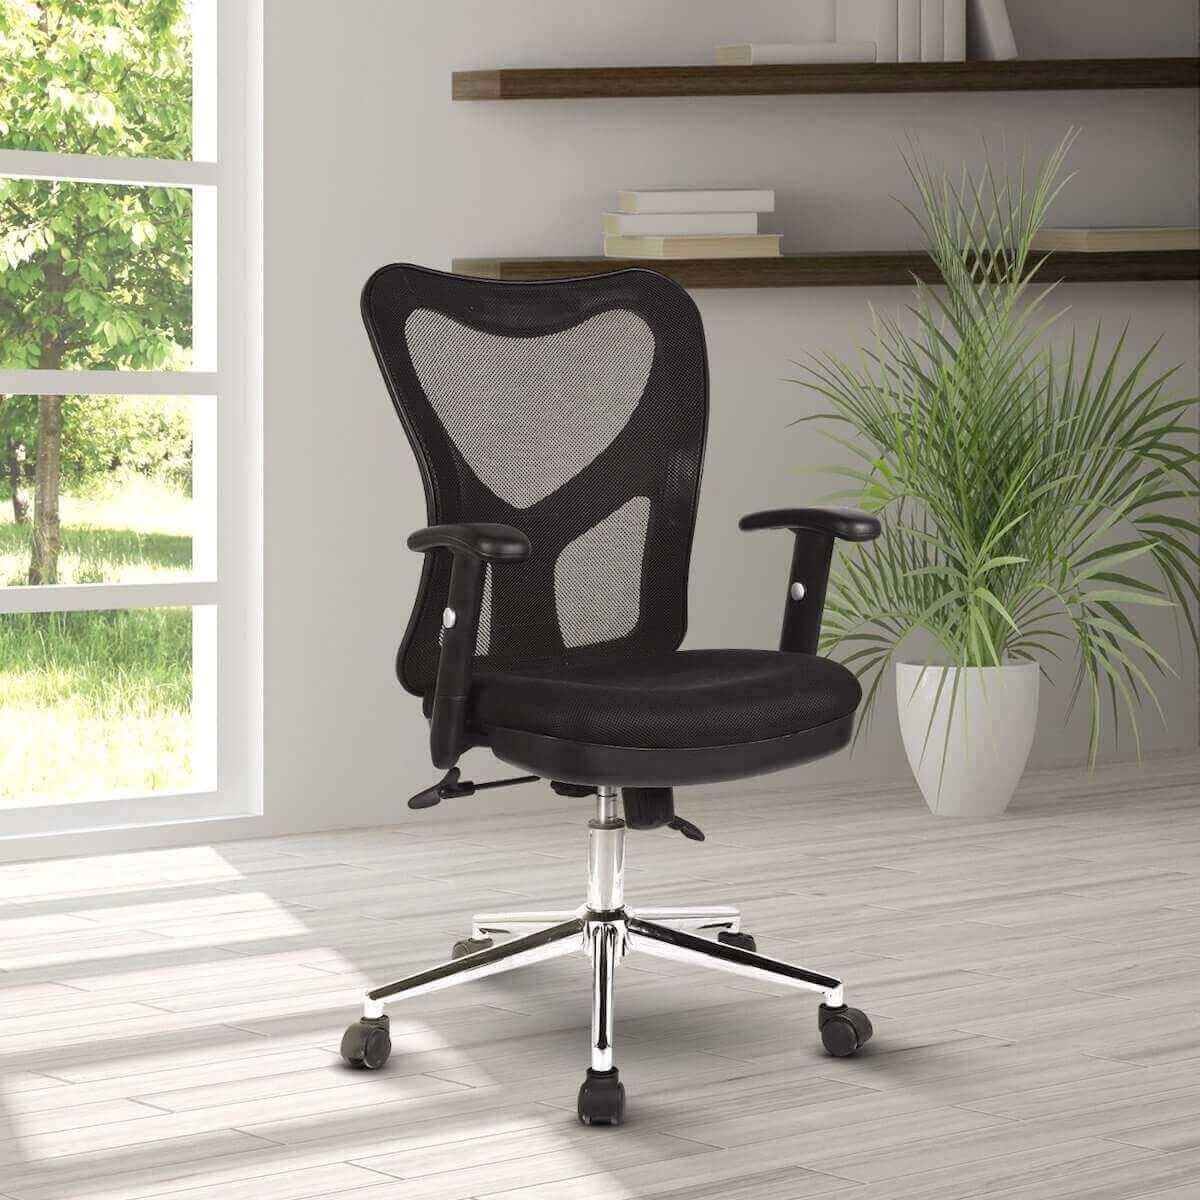 Techni Mobili Black High Back Mesh Office Chair With Chrome Base RTA-0098M-BK in Office